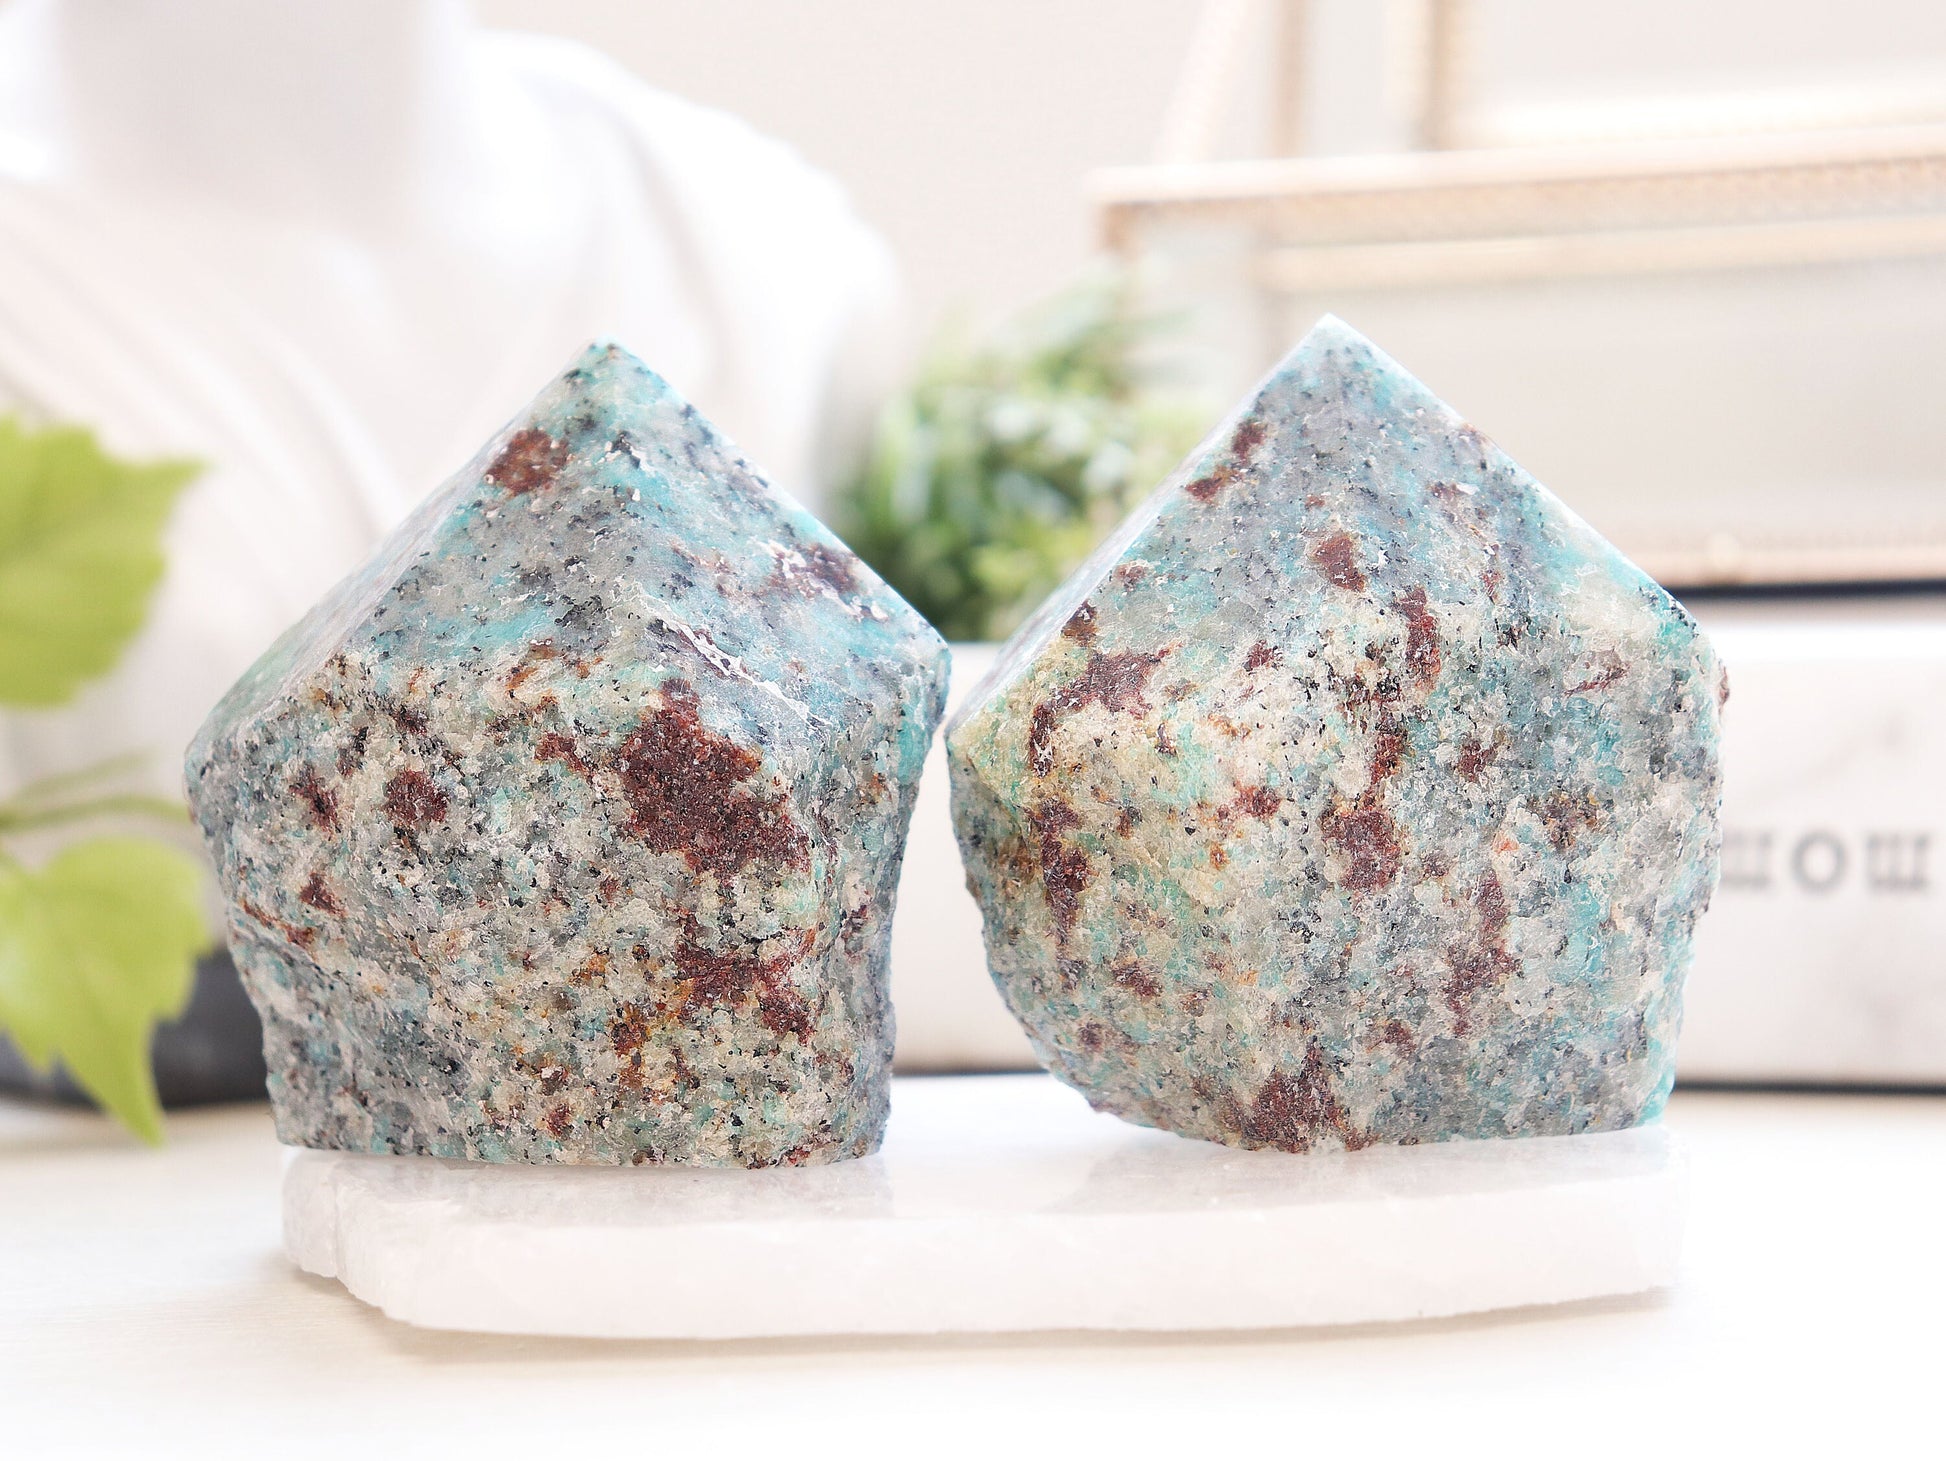 Polished Amazonite Base Cuts, Ethically Sourced, Home Décor Statements